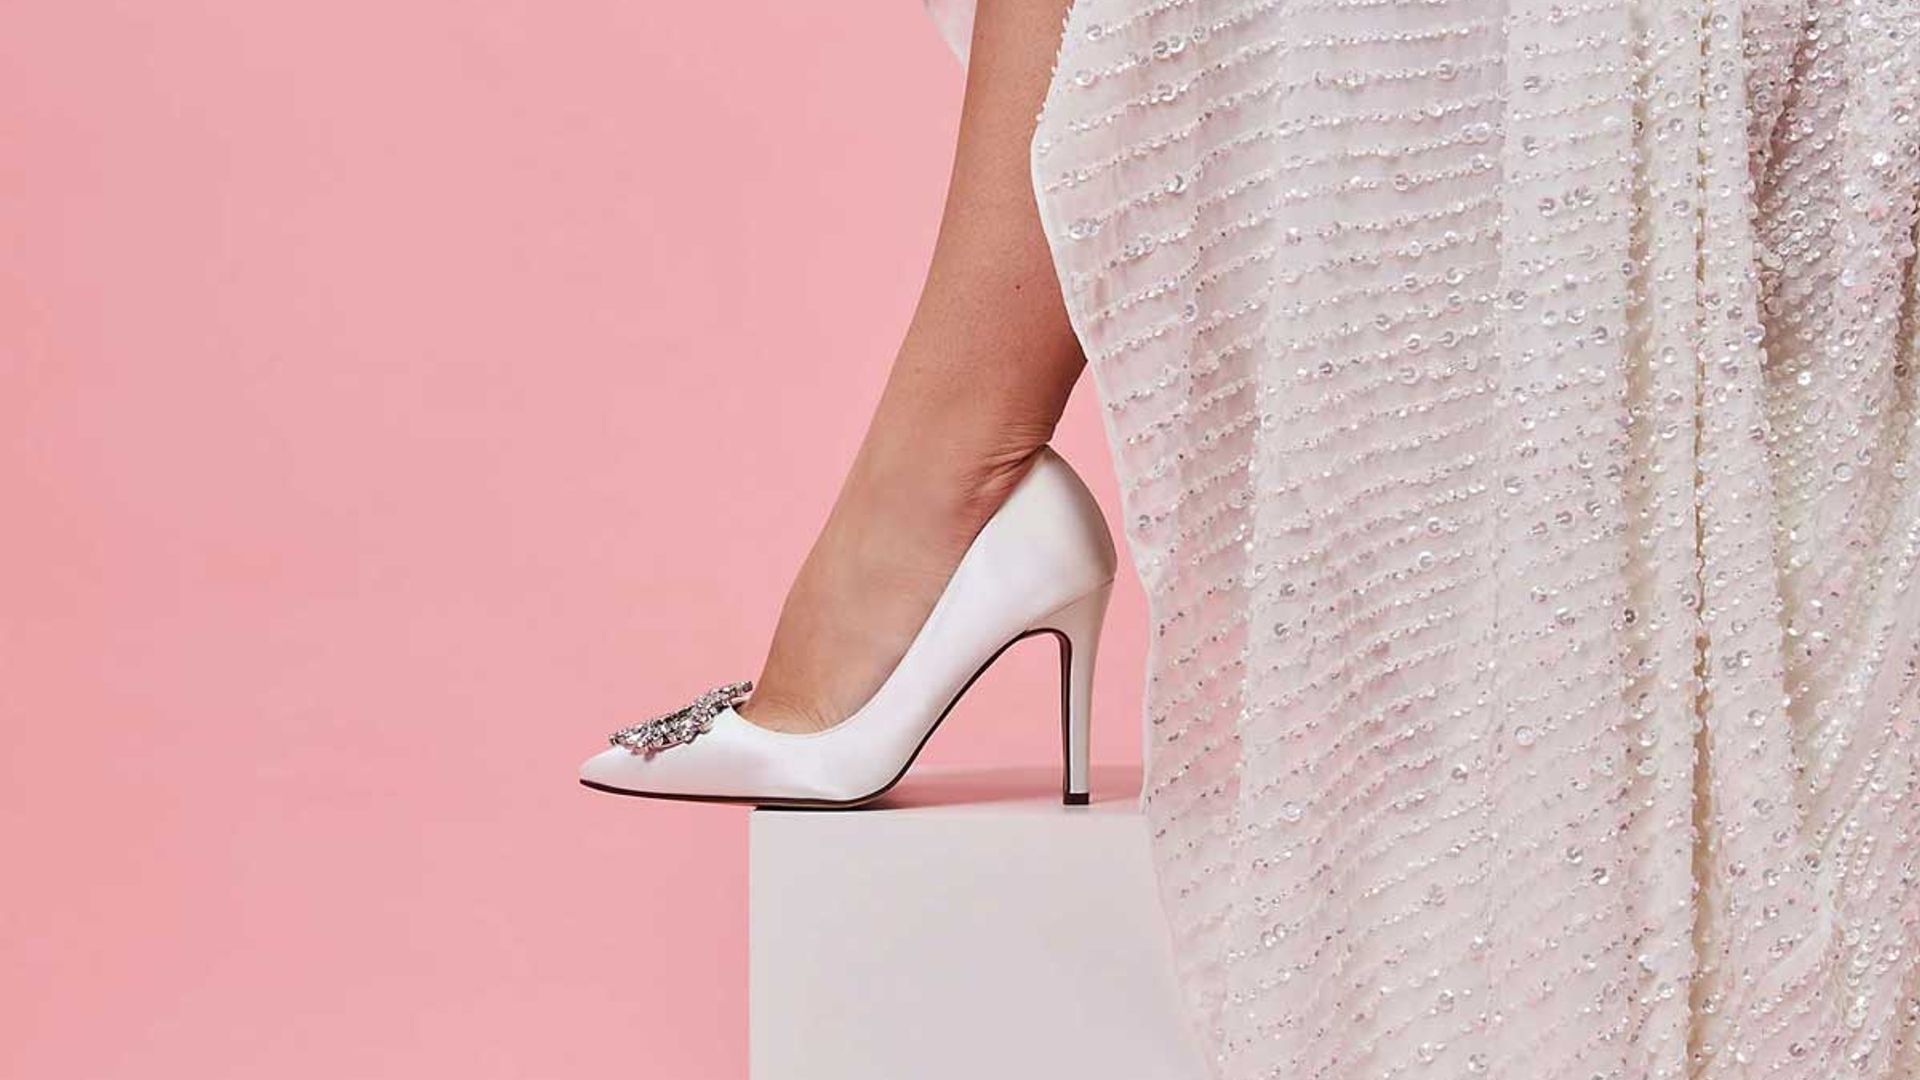 These John Lewis wedding shoes could be mistaken for an £800 designer pair